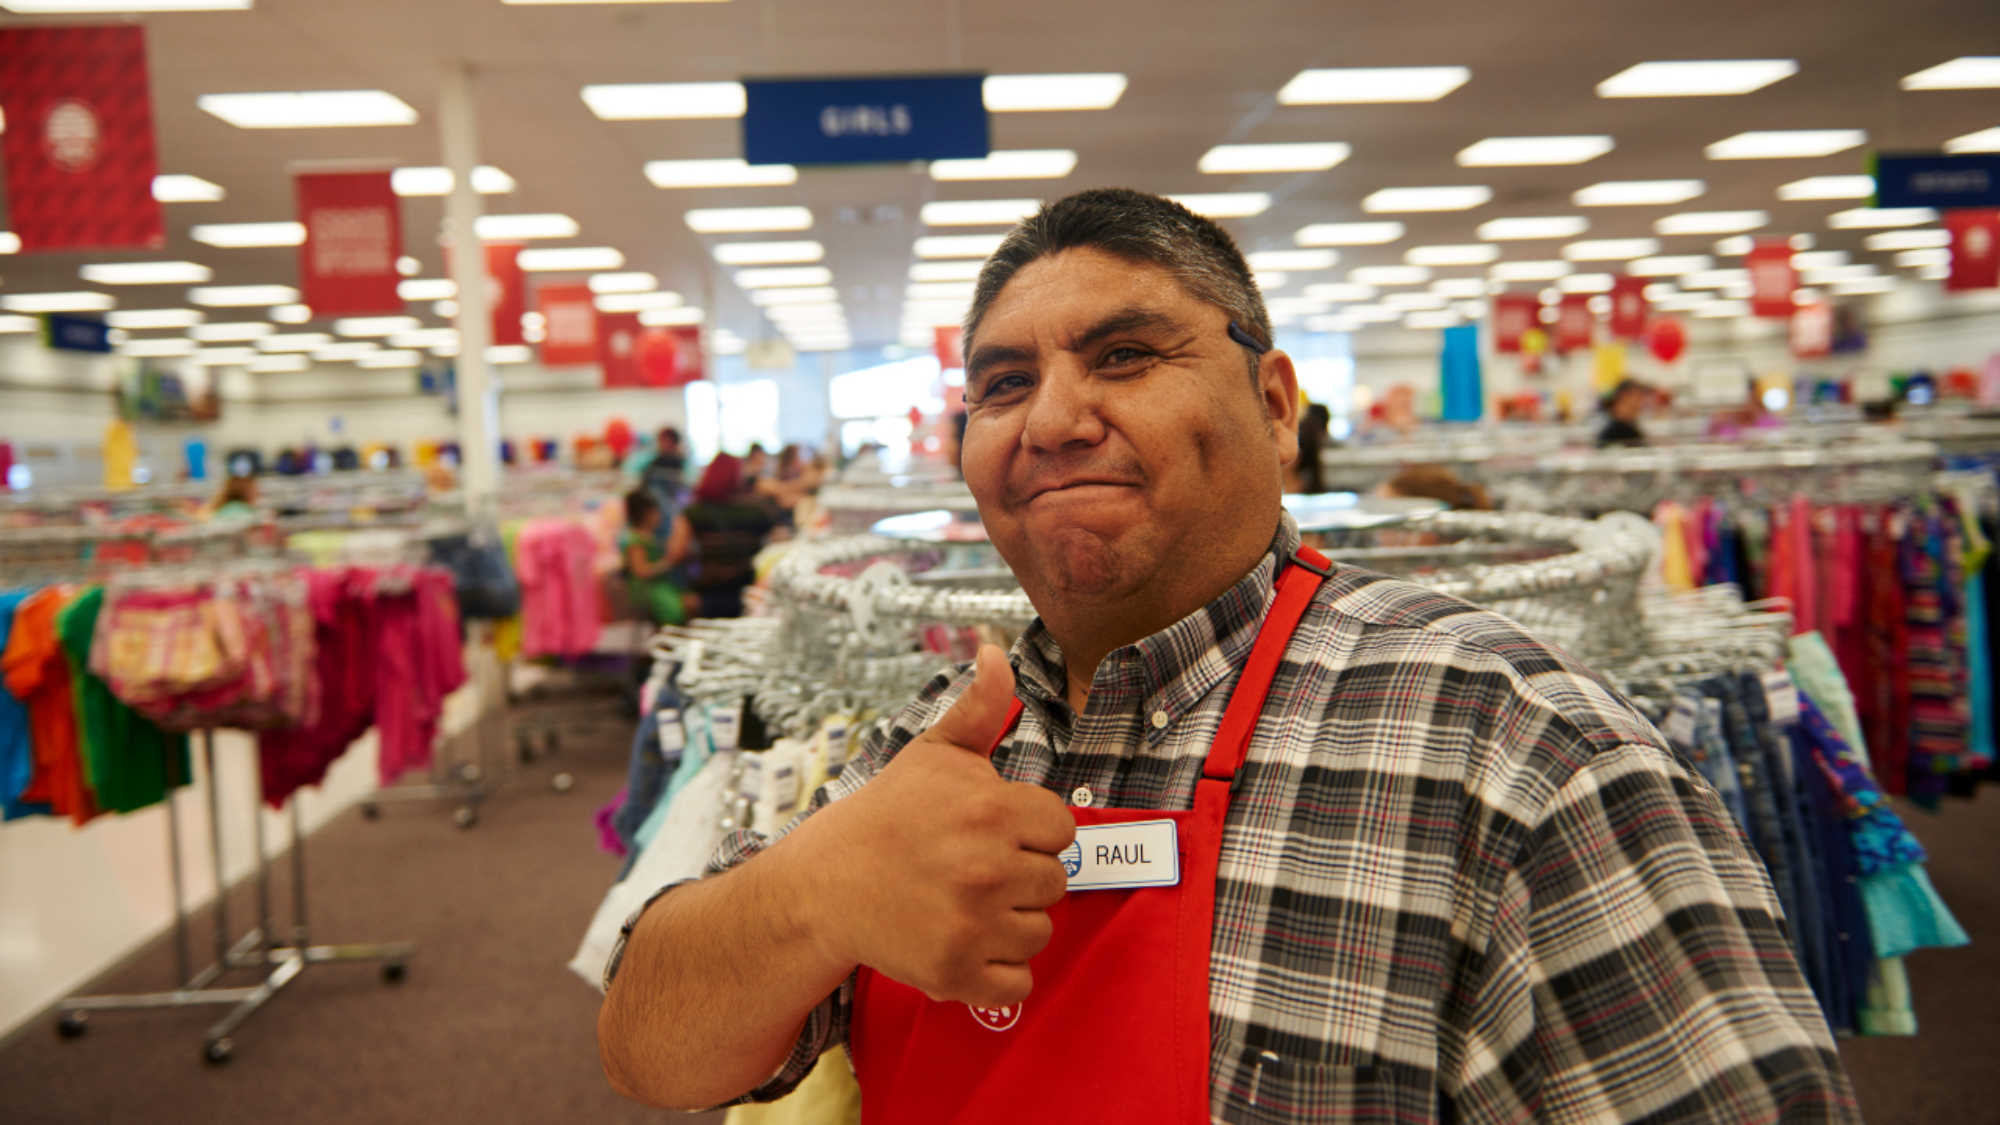 A male DI associate flashes a thumbs up as he goes about his work in the clothing section.